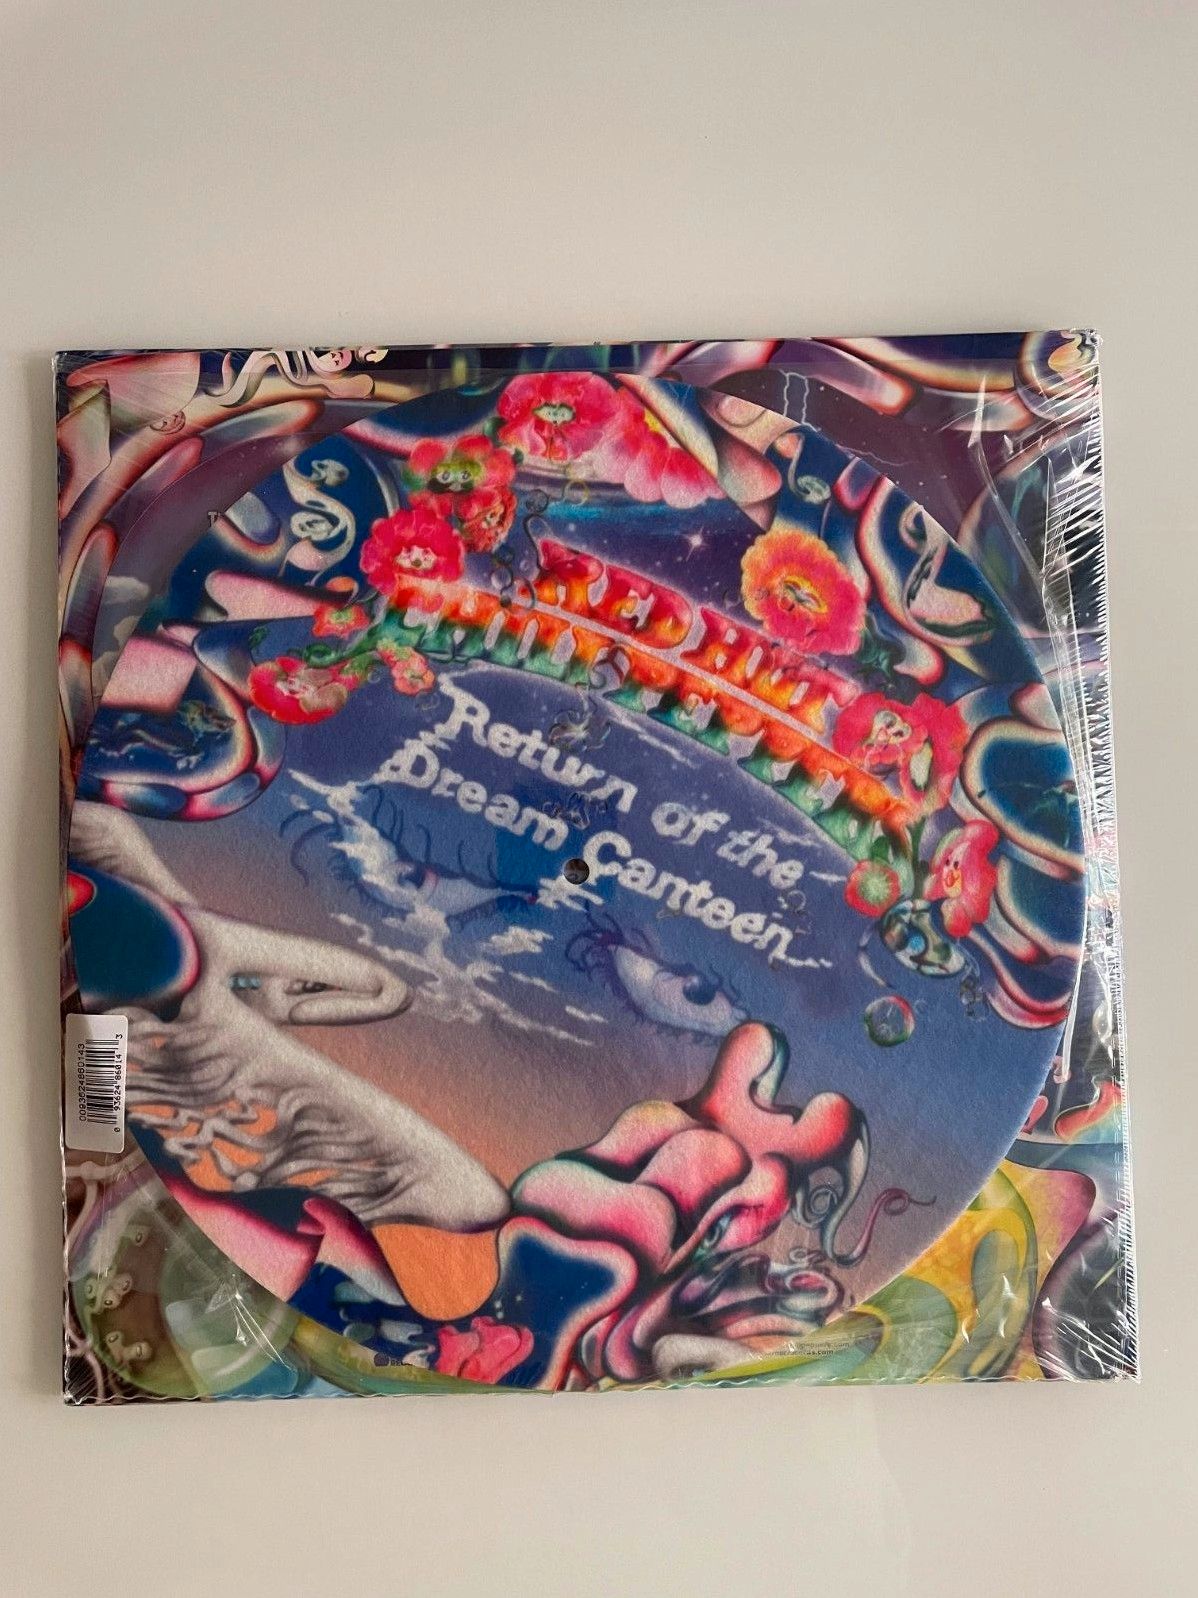 RED HOT CHILI PEPPERS – RETURN OF THE DREAM CANTEEN +slipmat LP2